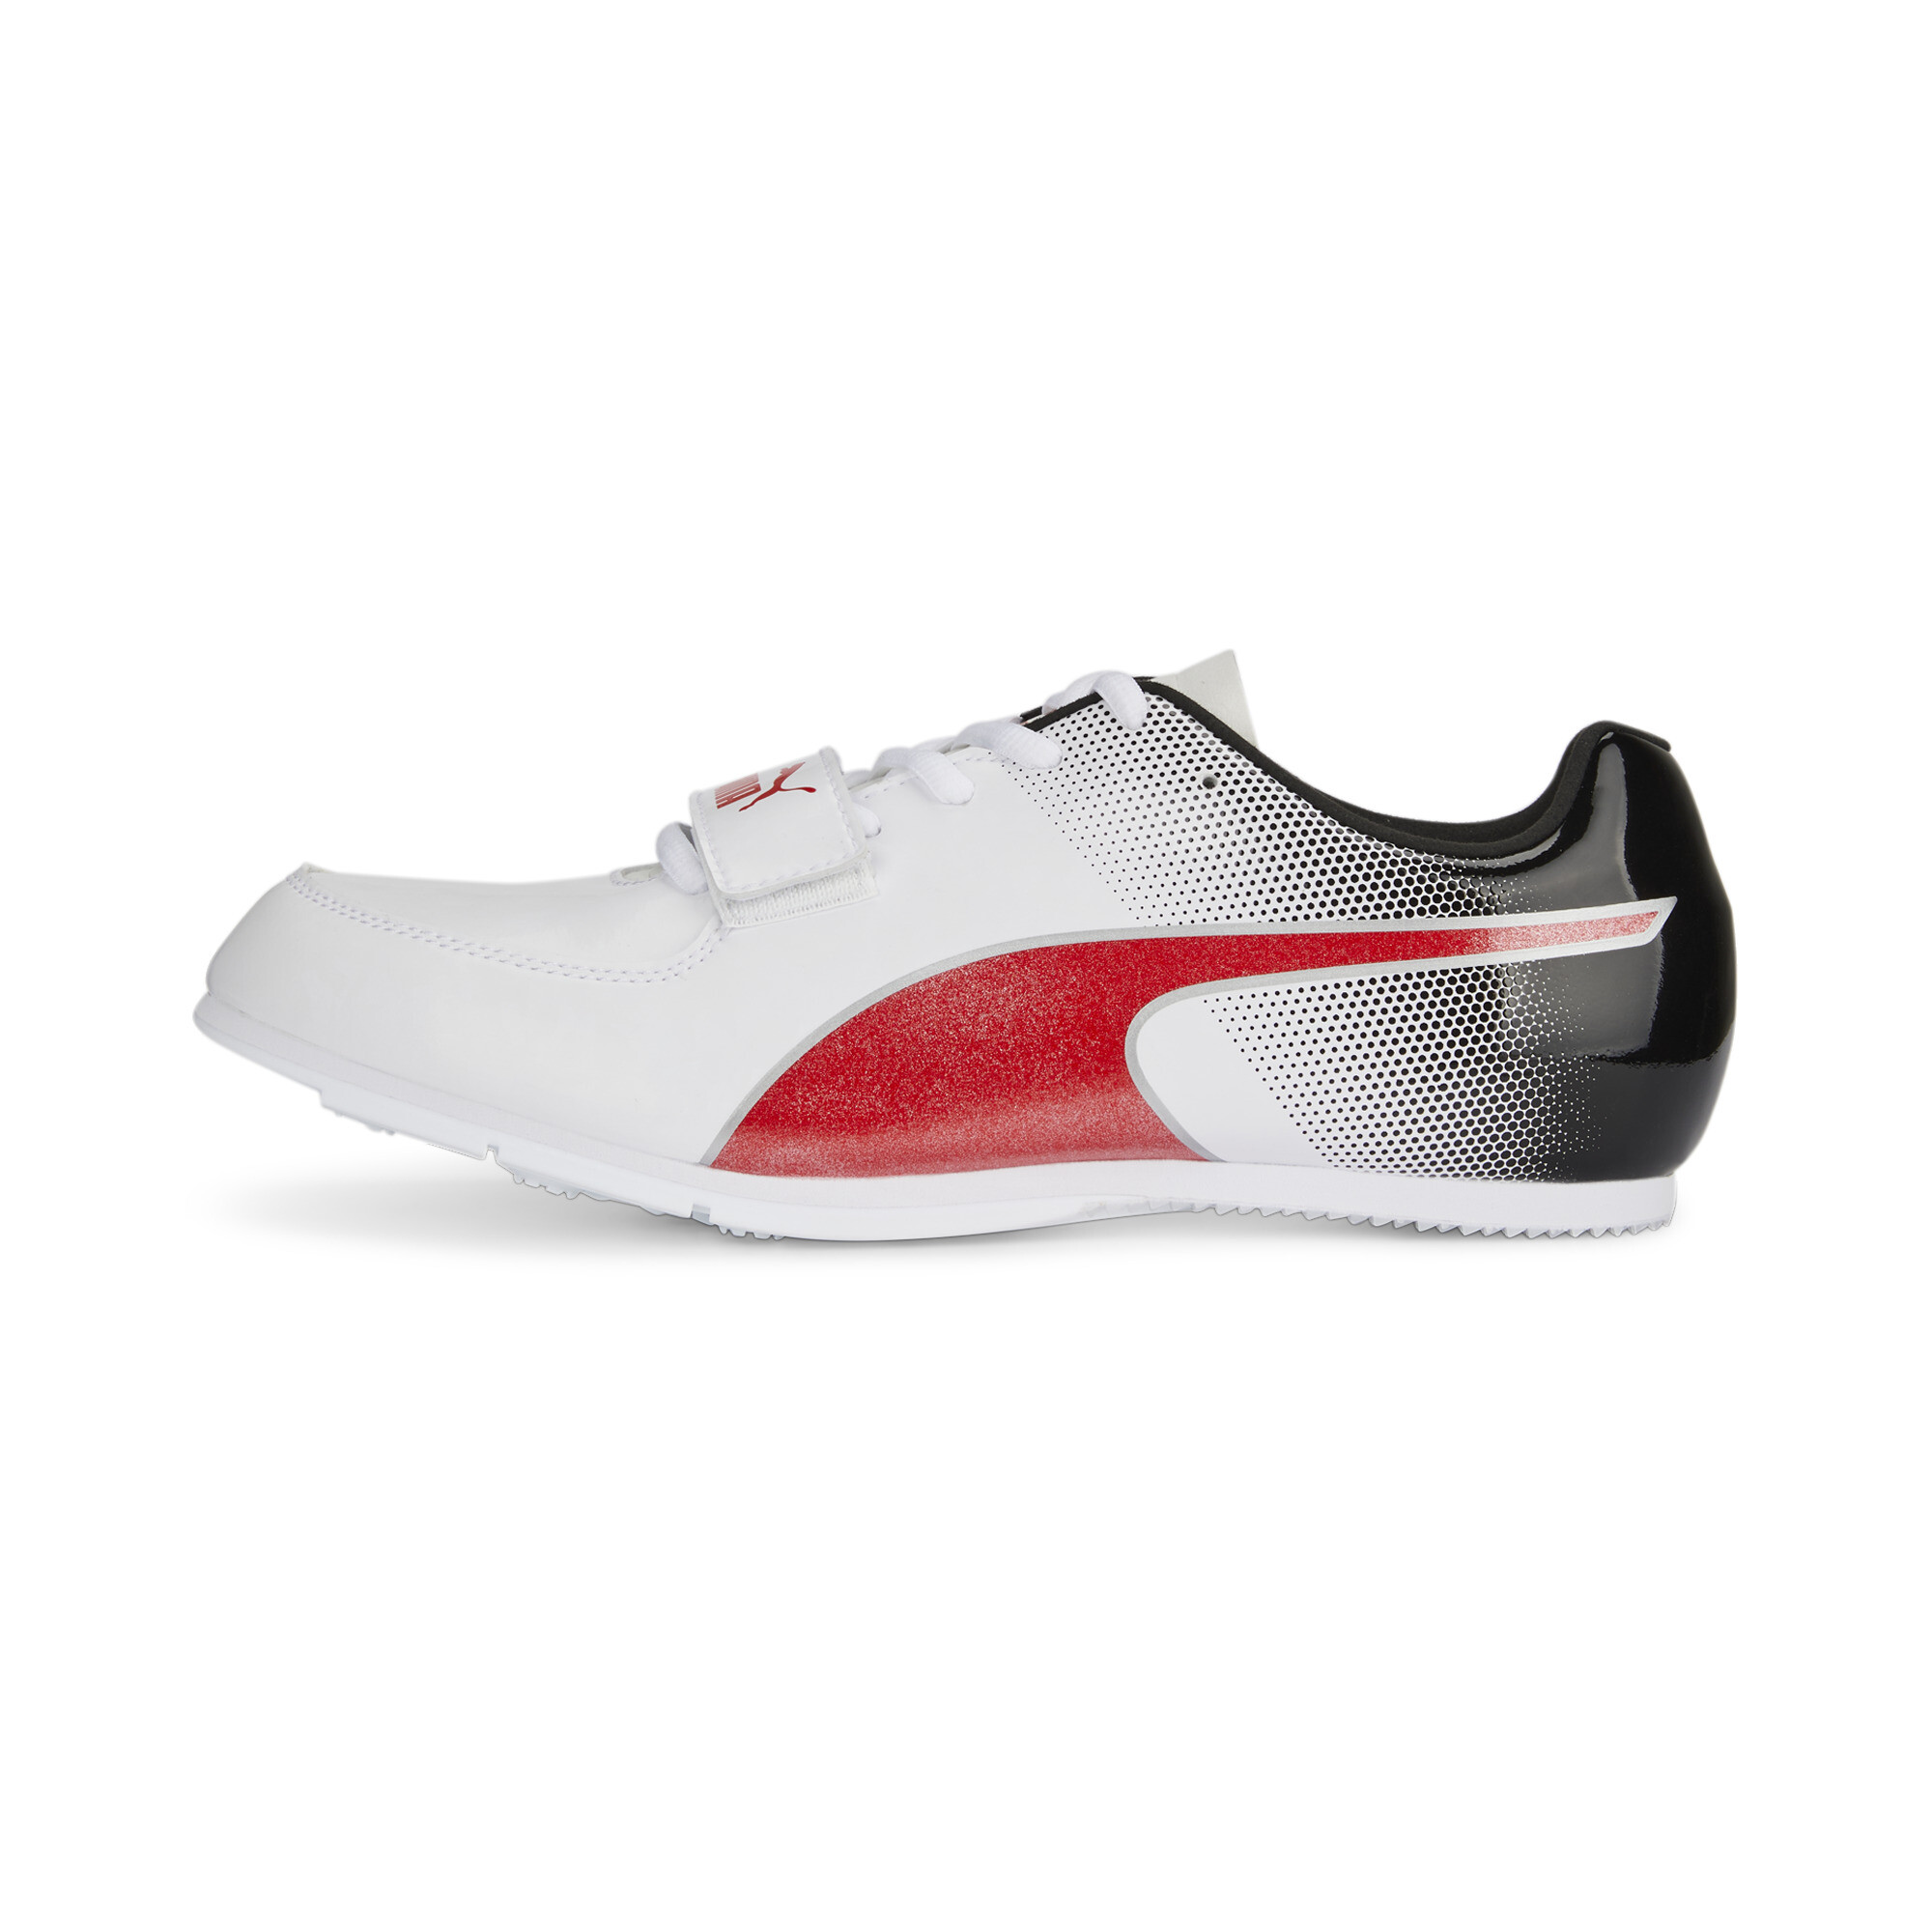 Puma Evo SPEED Long Jump 10 Track And Field Shoes, White, Size 42, Shoes